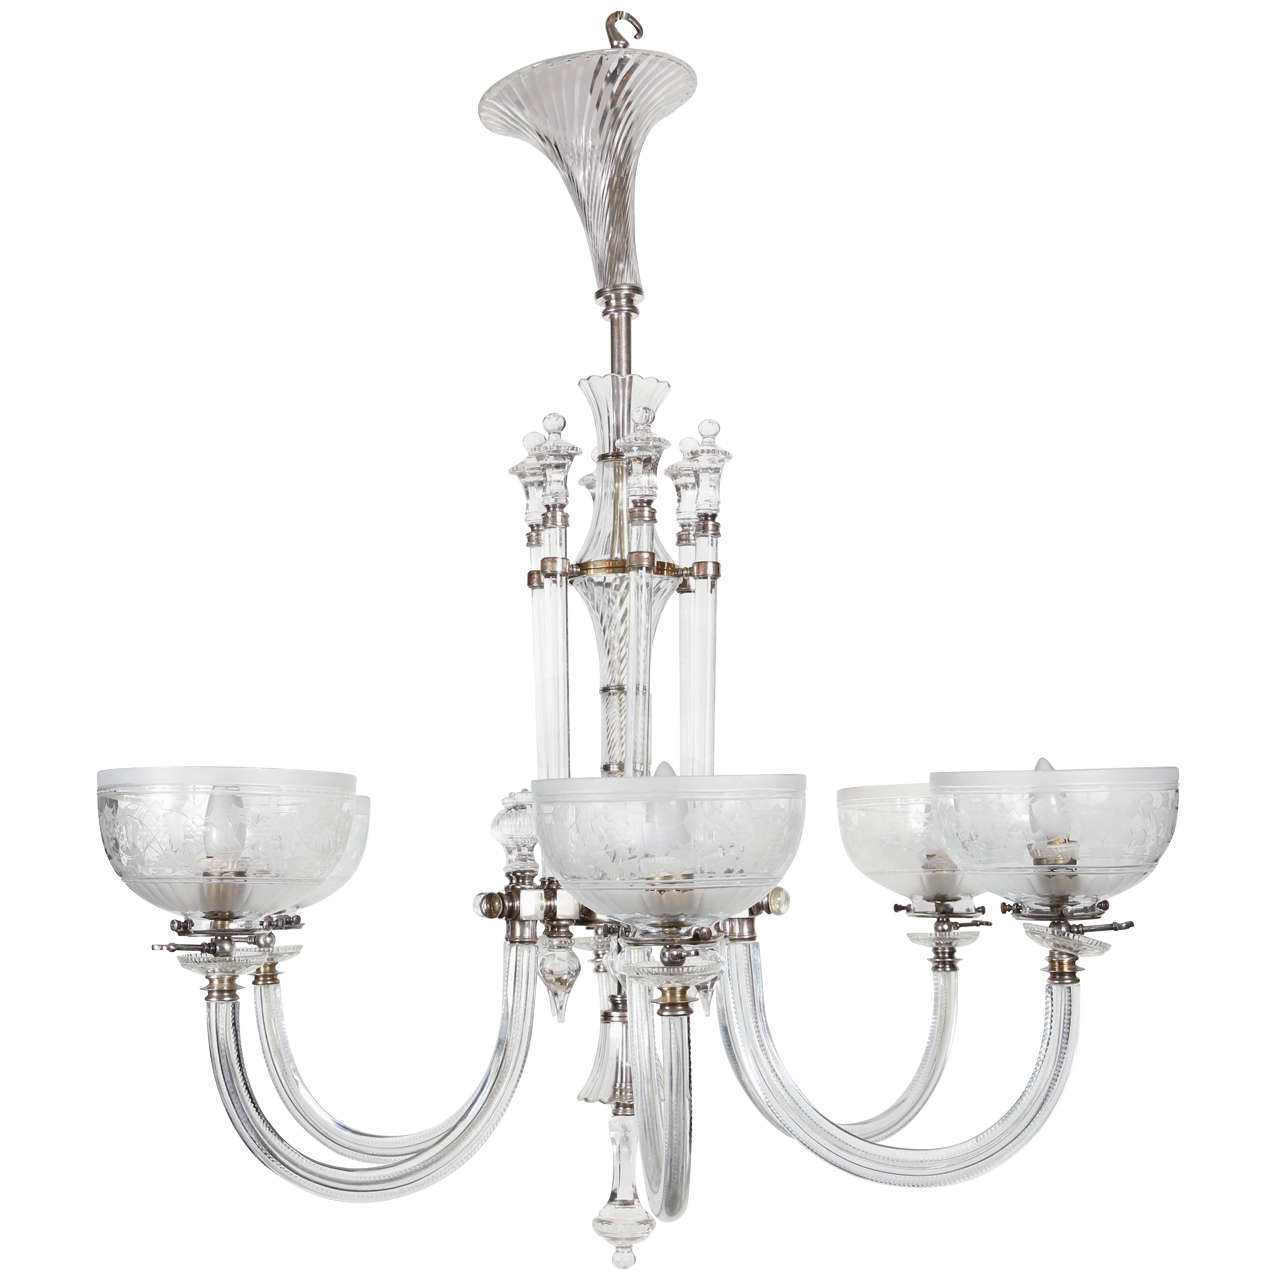 2003 Excellent Osler Gas Chandelier Replica with Six Lamps, Electrified